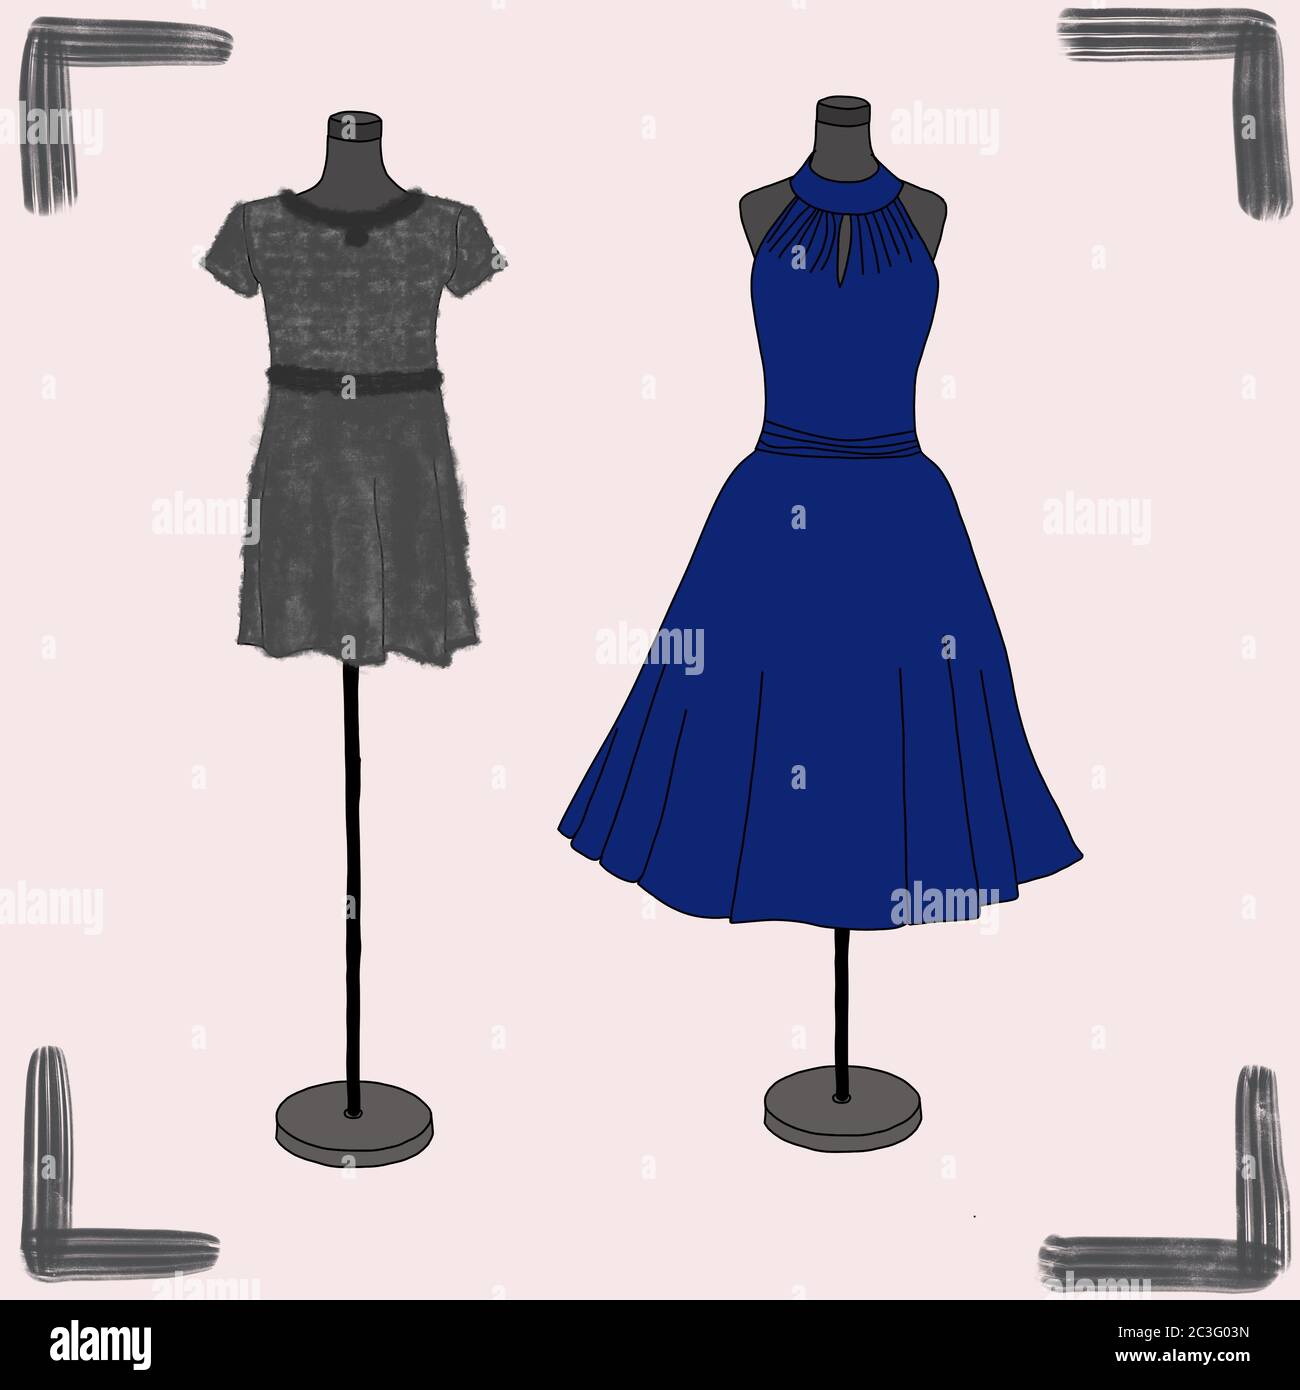 Fashion illustration: two dress forms with dresses Stock Photo